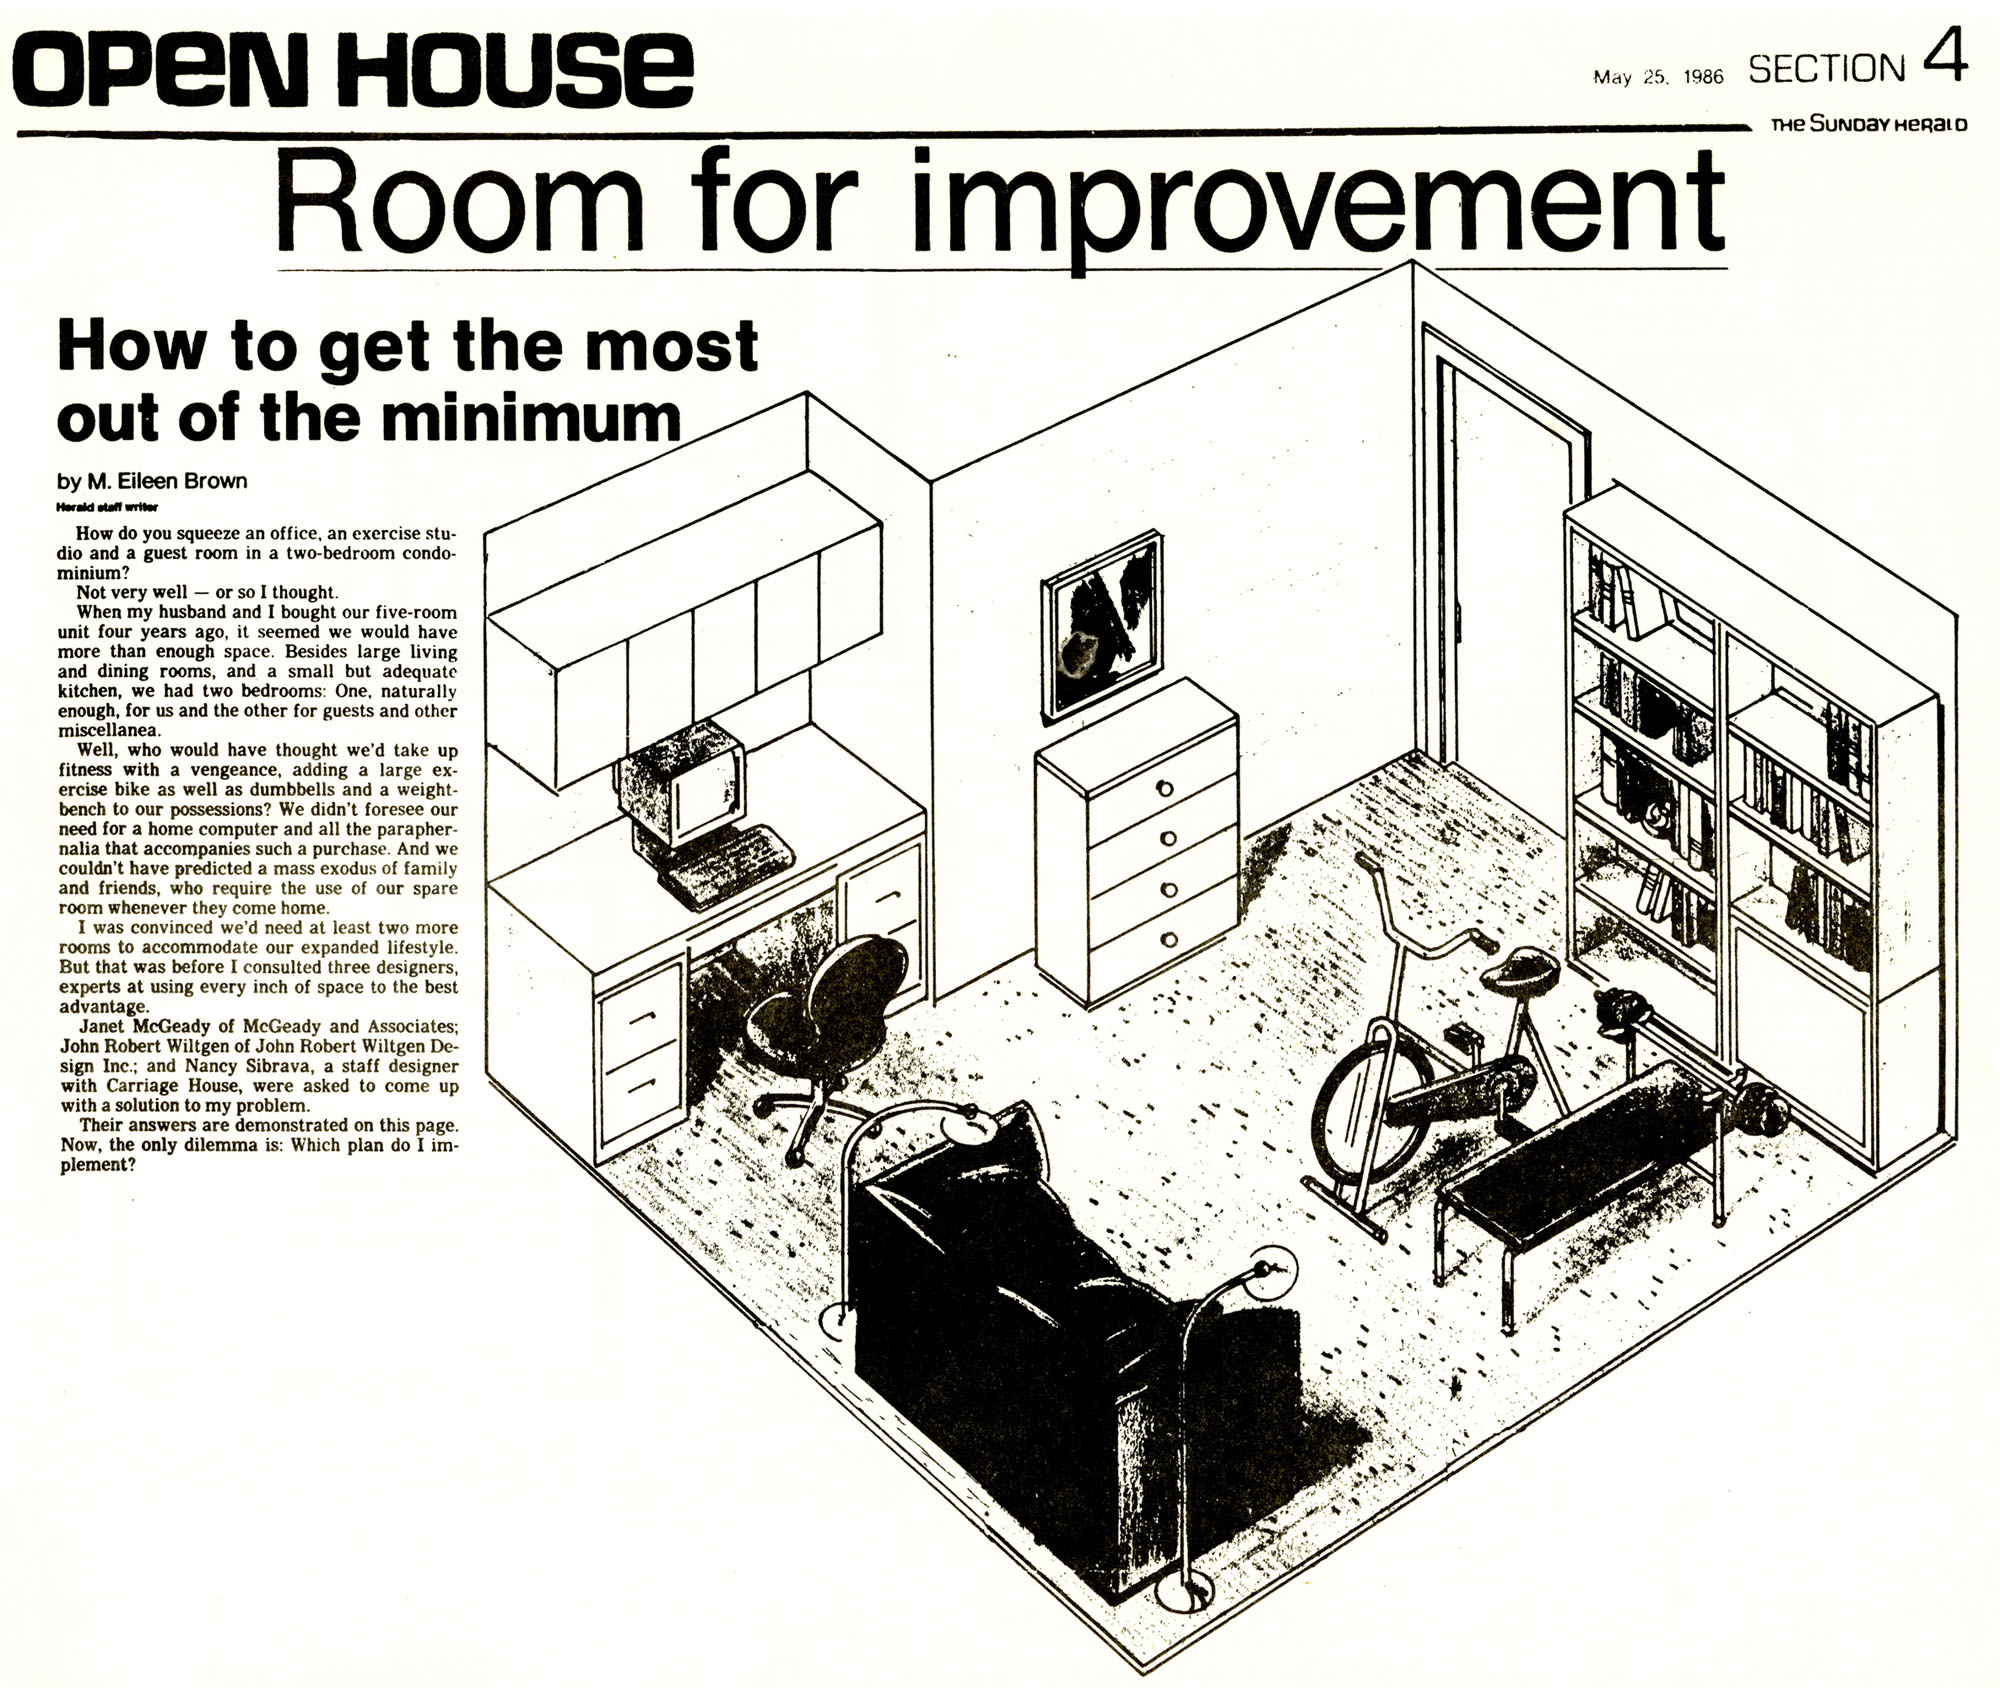 may25,1986 sunday herald- Room for Improvement